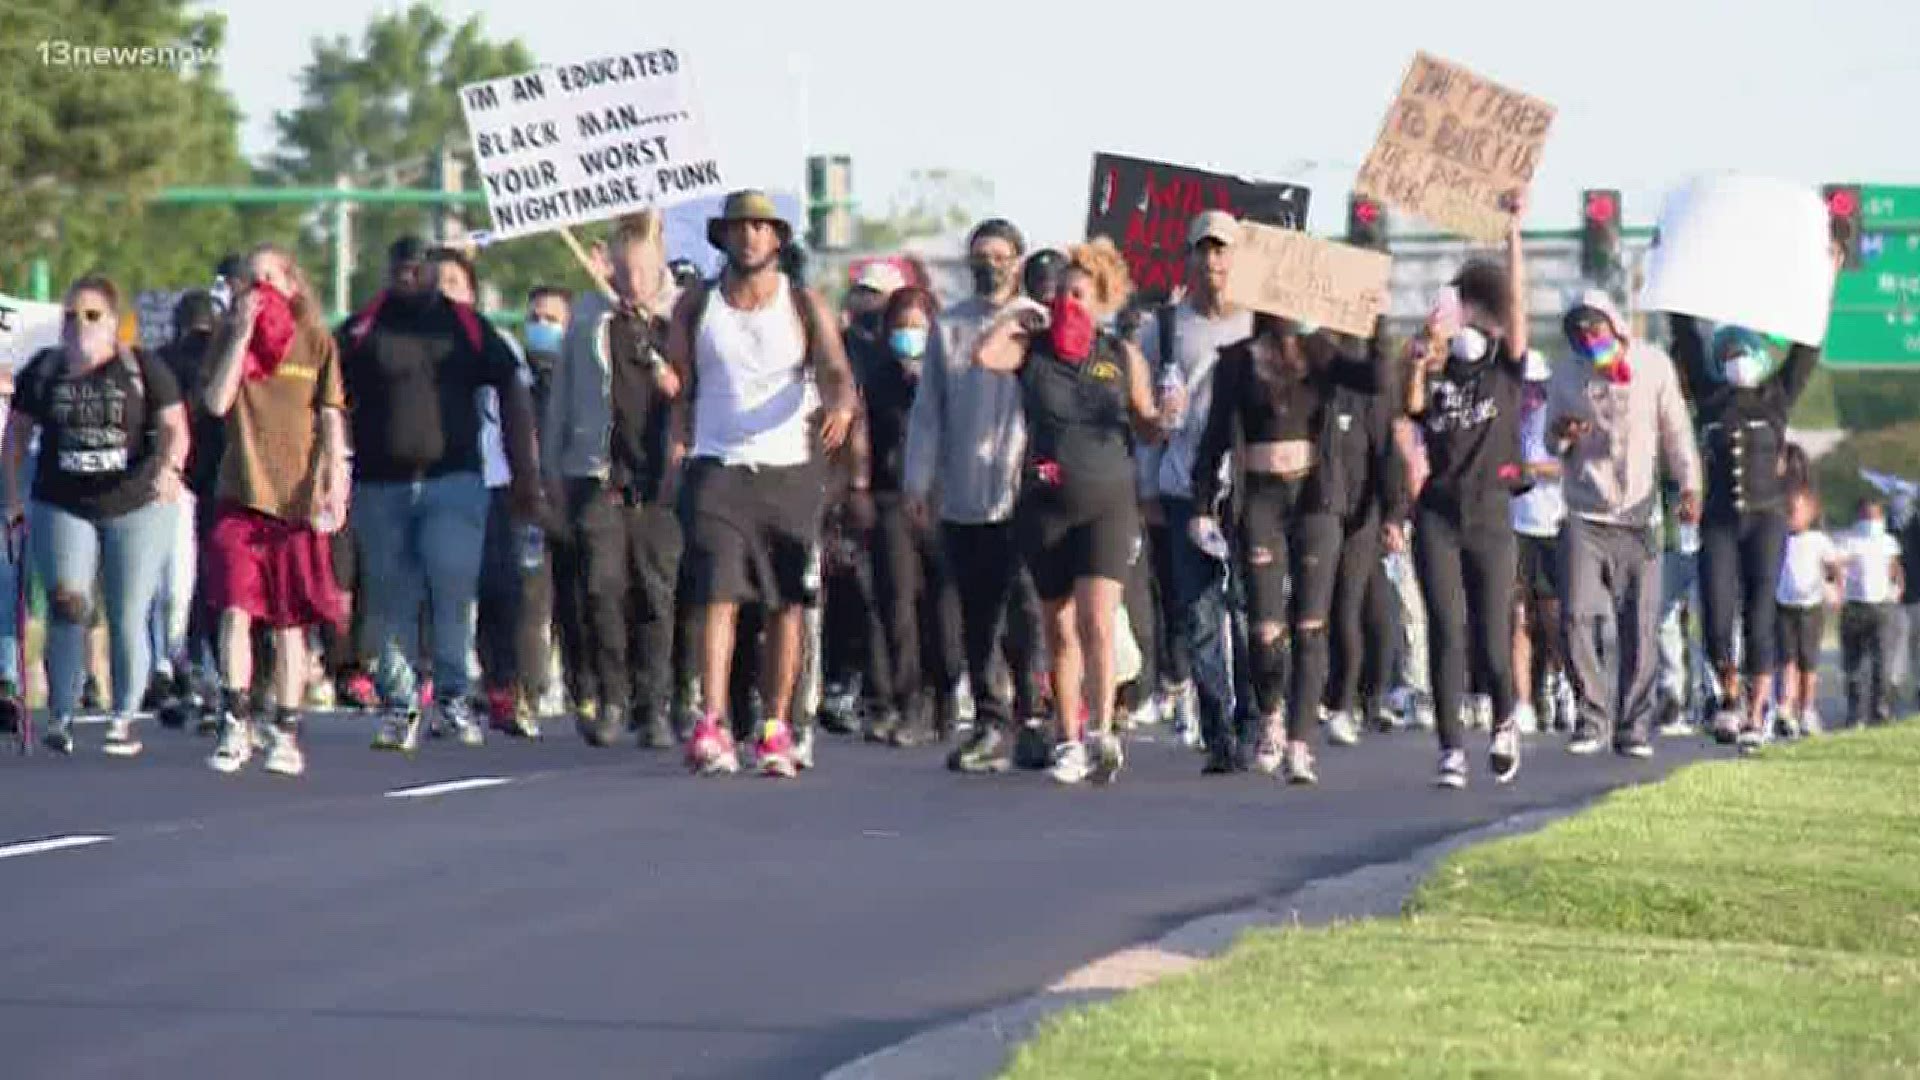 Protesters calling for justice in the death of George Floyd moved onto Interstate 264 in Norfolk on Monday afternoon, causing traffic in both directions to halt.